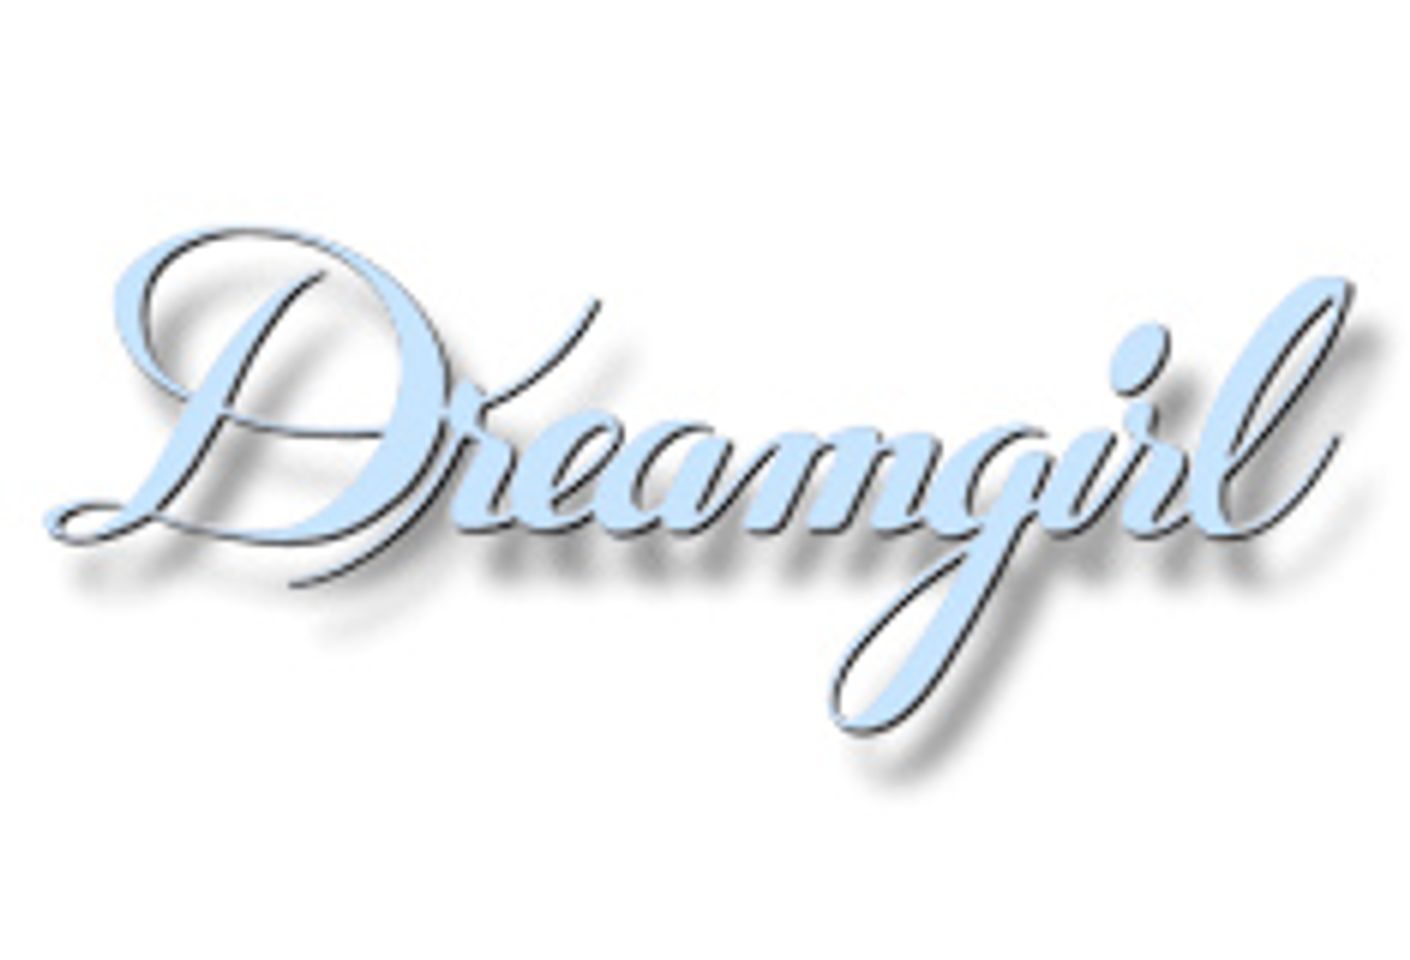 Dreamgirl Responds to Increased Demand